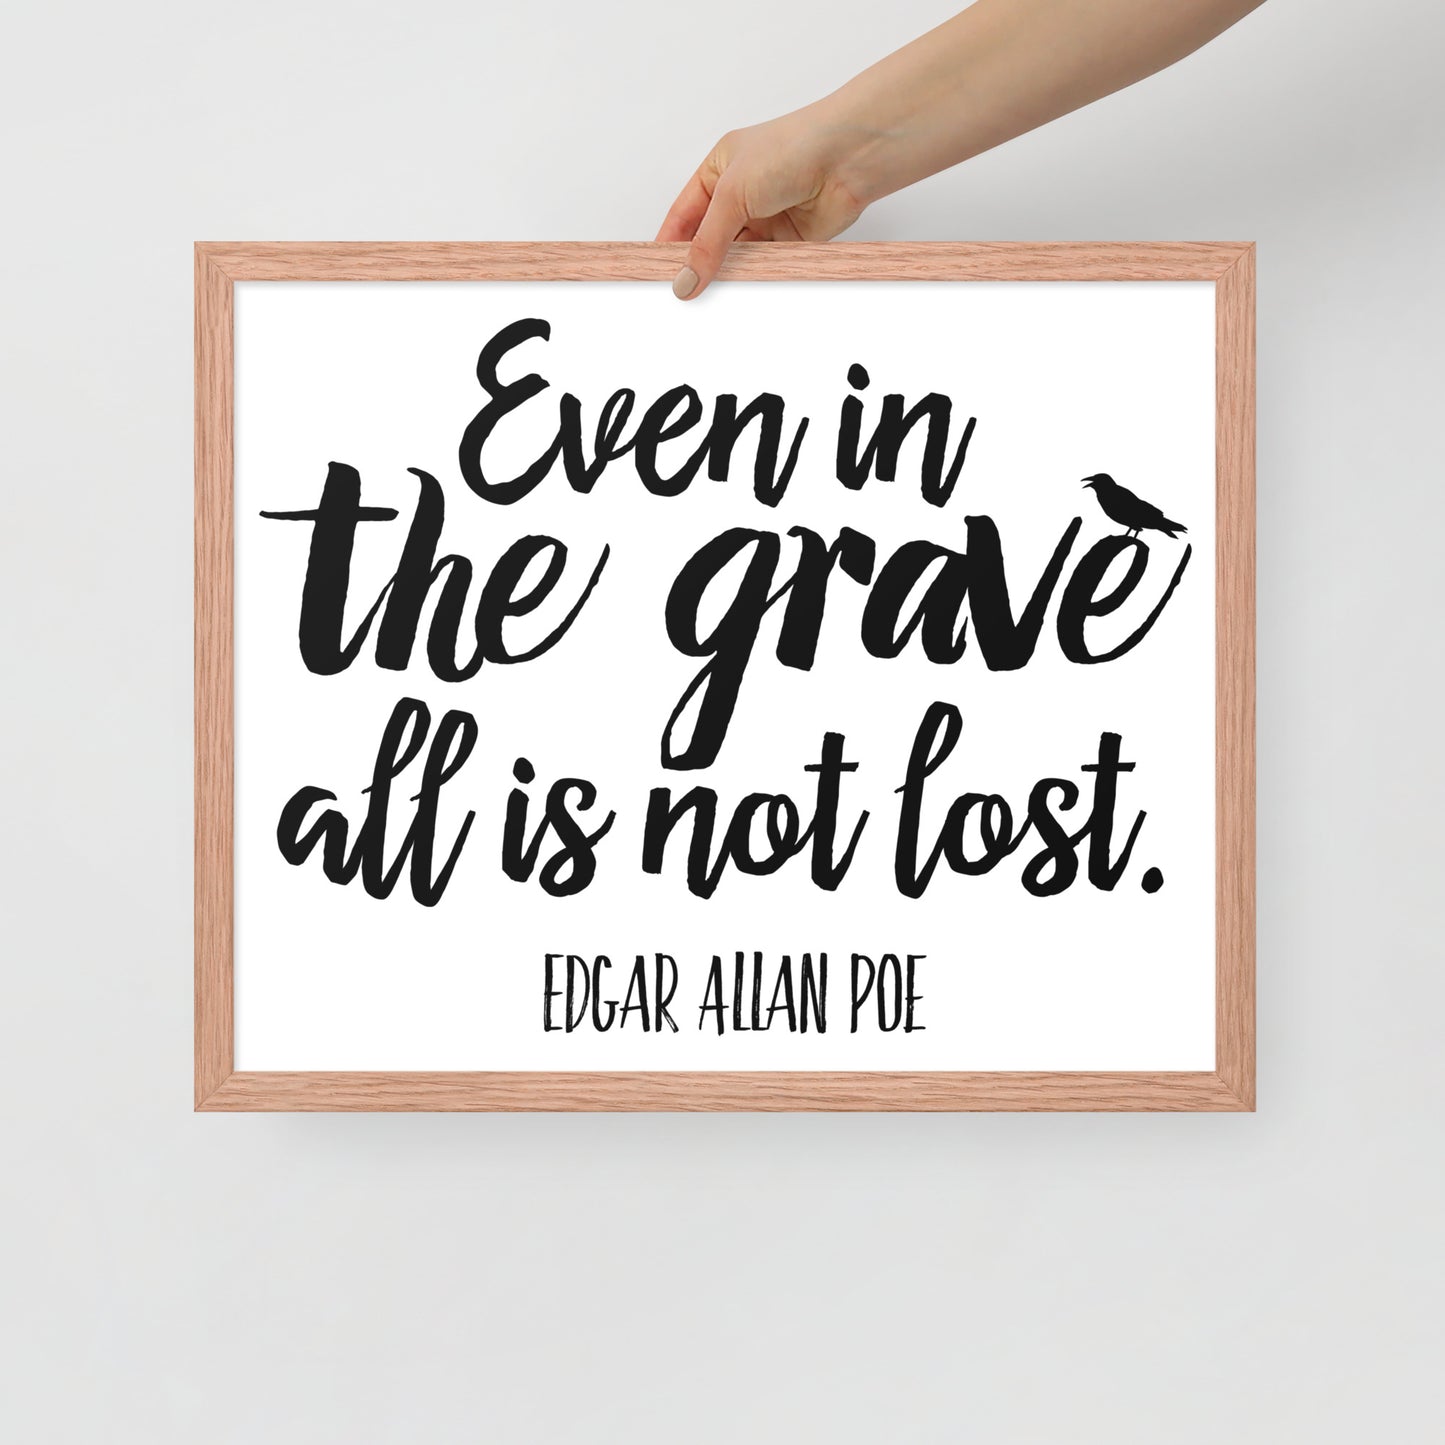 Even in the Grave - Edgar Allan Poe Quote Framed Poster - 16 x 20 Red Oak Frame